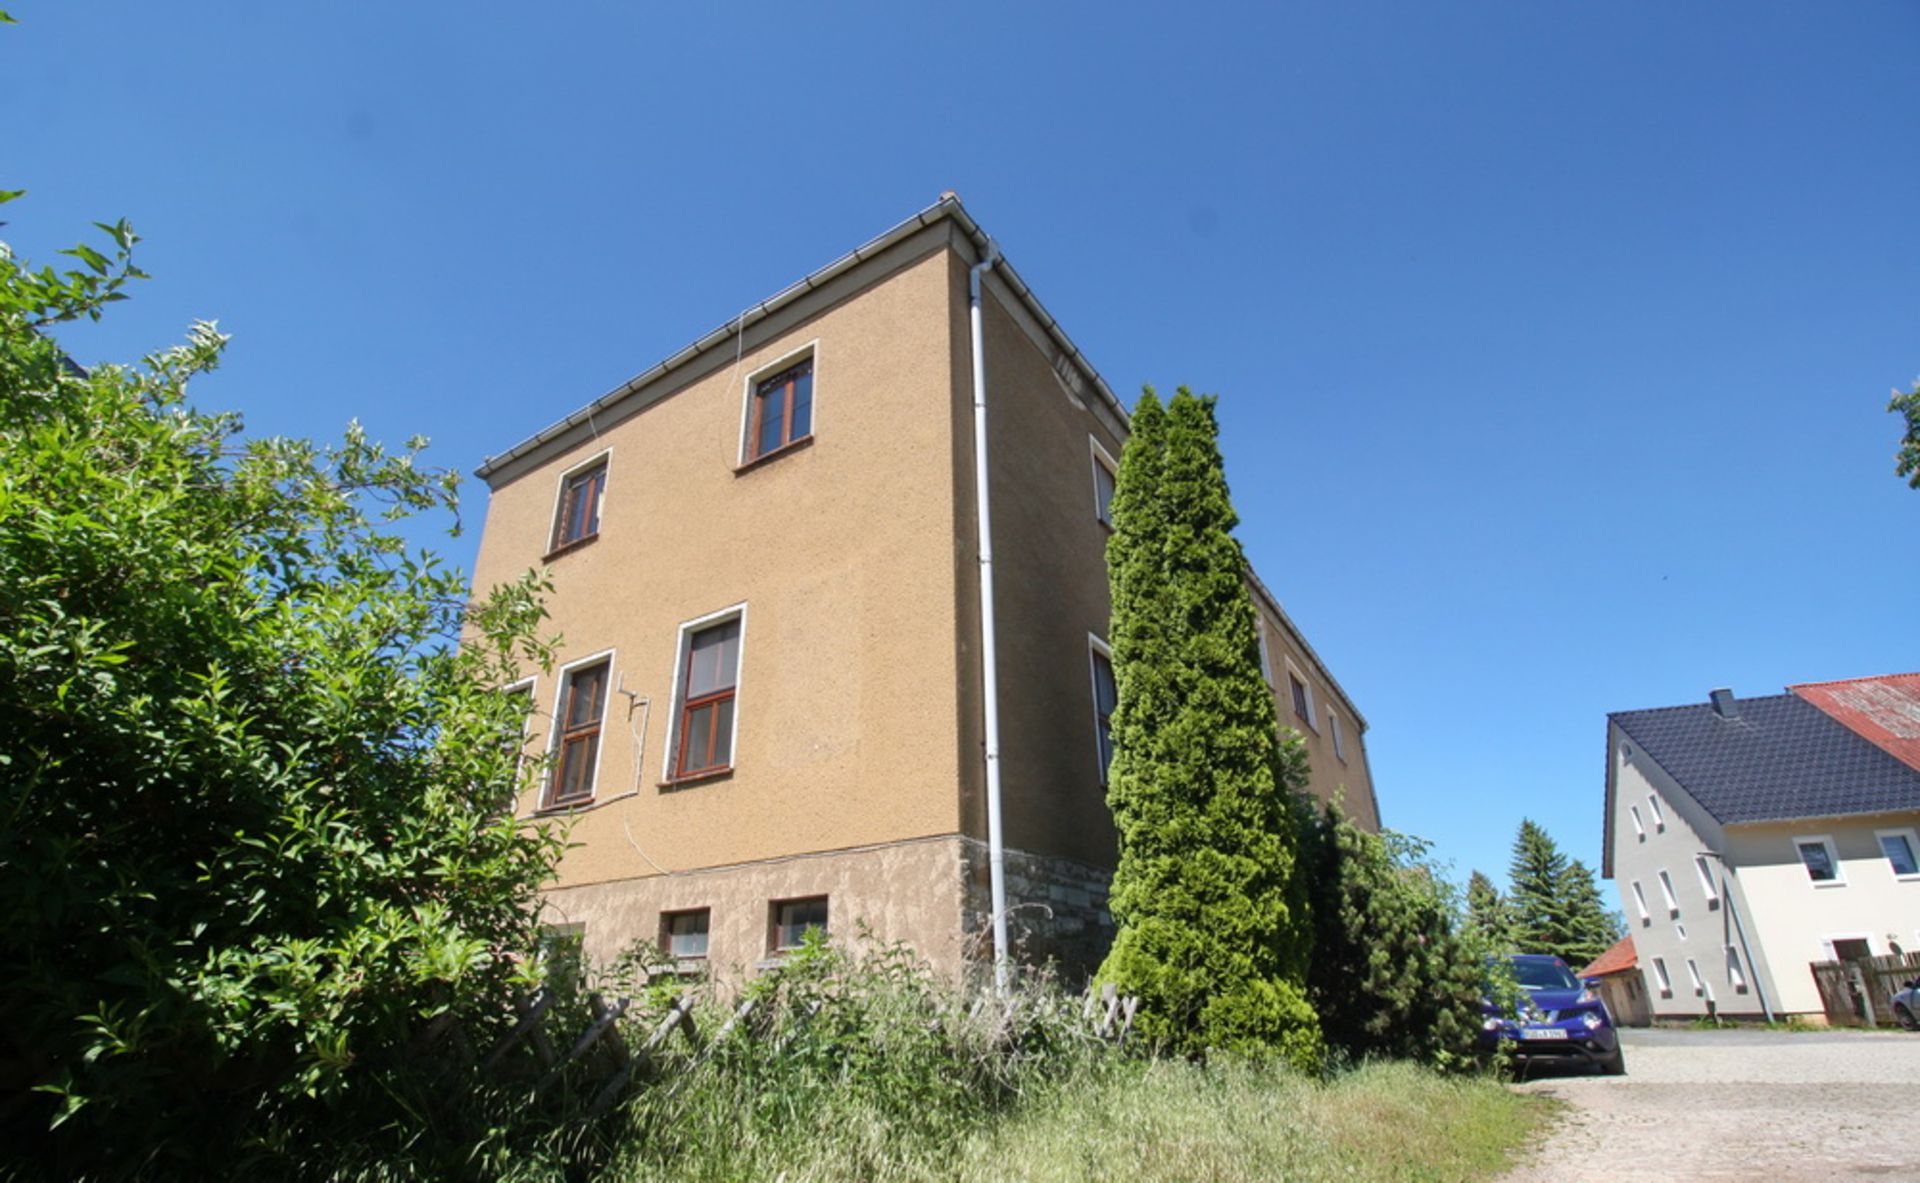 LARGE HOUSING BLOCK HORNSOMMEM, GERMANY READY TO MOVE INTO FREEHOLD VACANT POSSESSION - Image 51 of 91